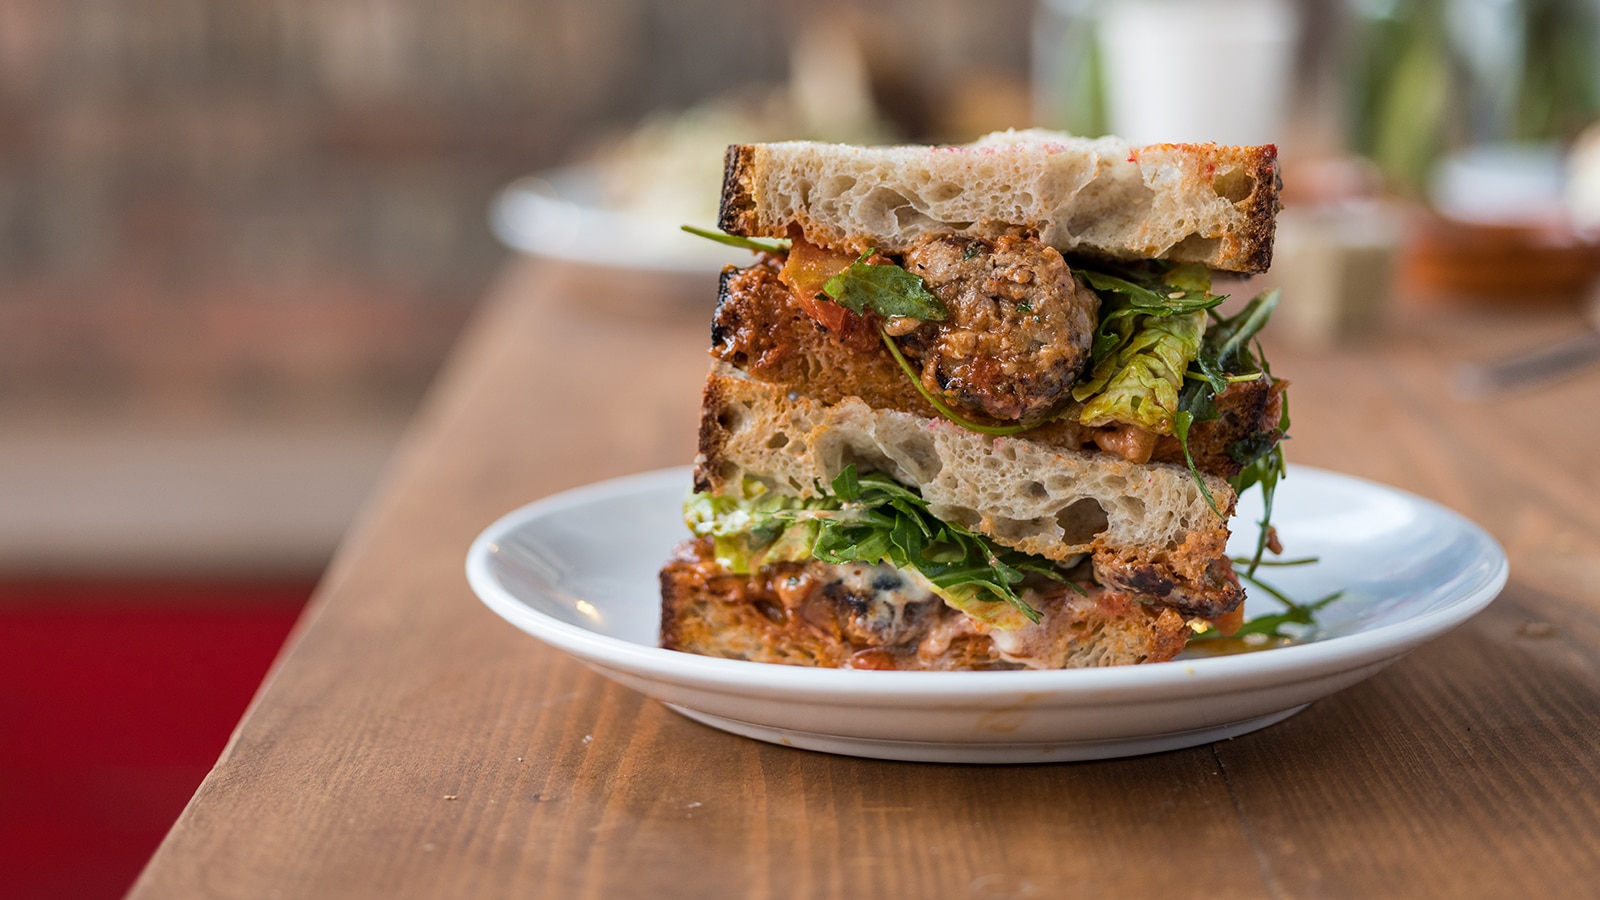 An Appreciation Of The (Not So Humble) Sandwich | The Journal | MR PORTER